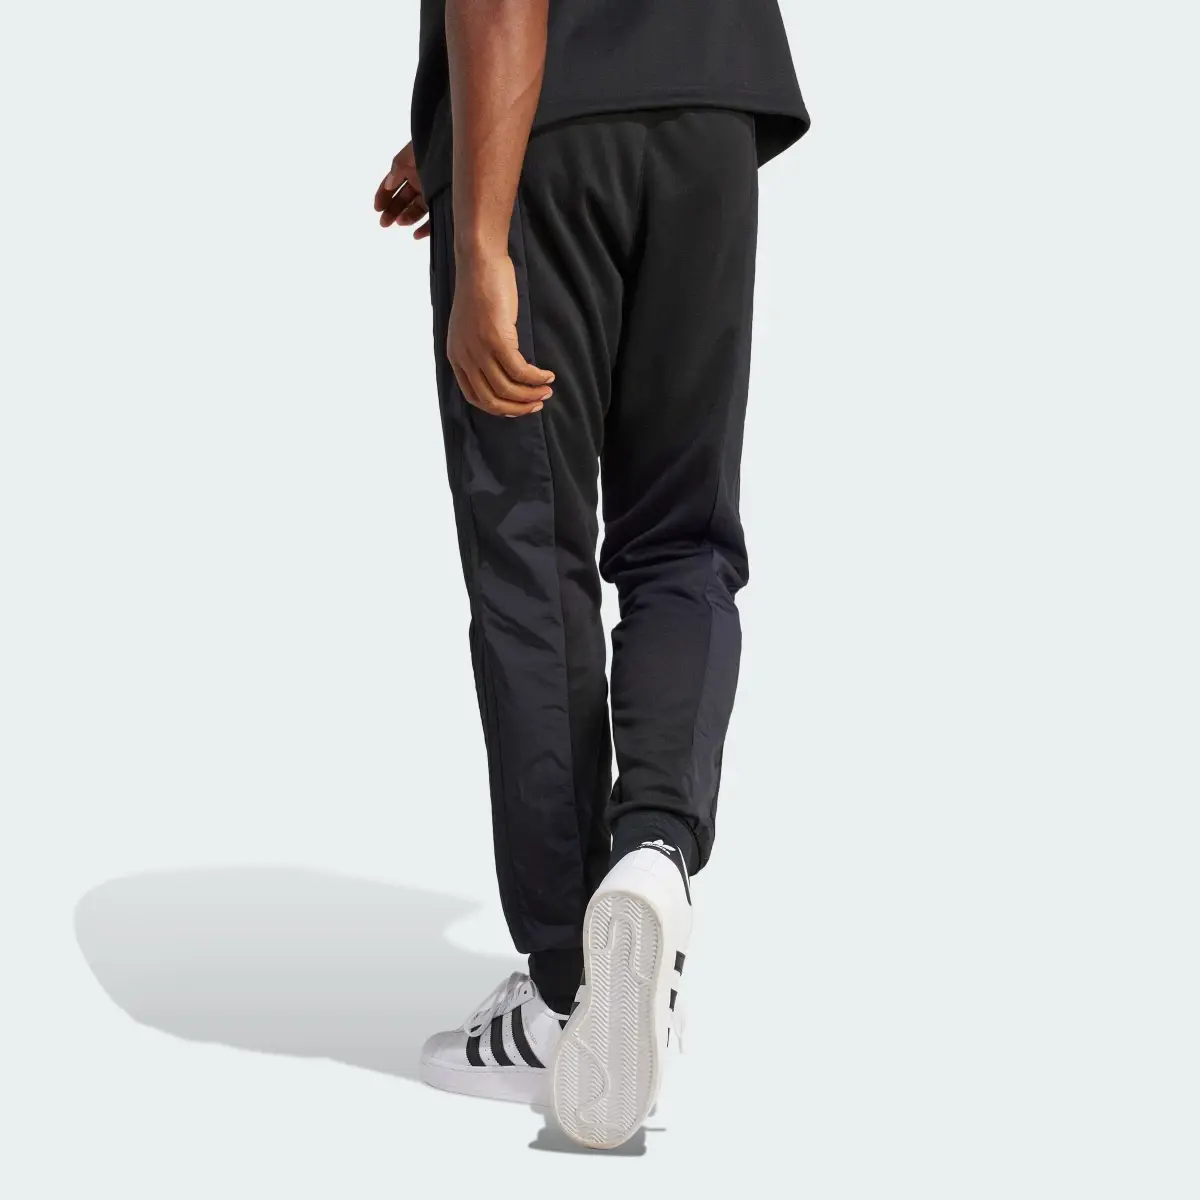 Adidas Adicolor Re-Pro SST Material Mix Track Pants. 2